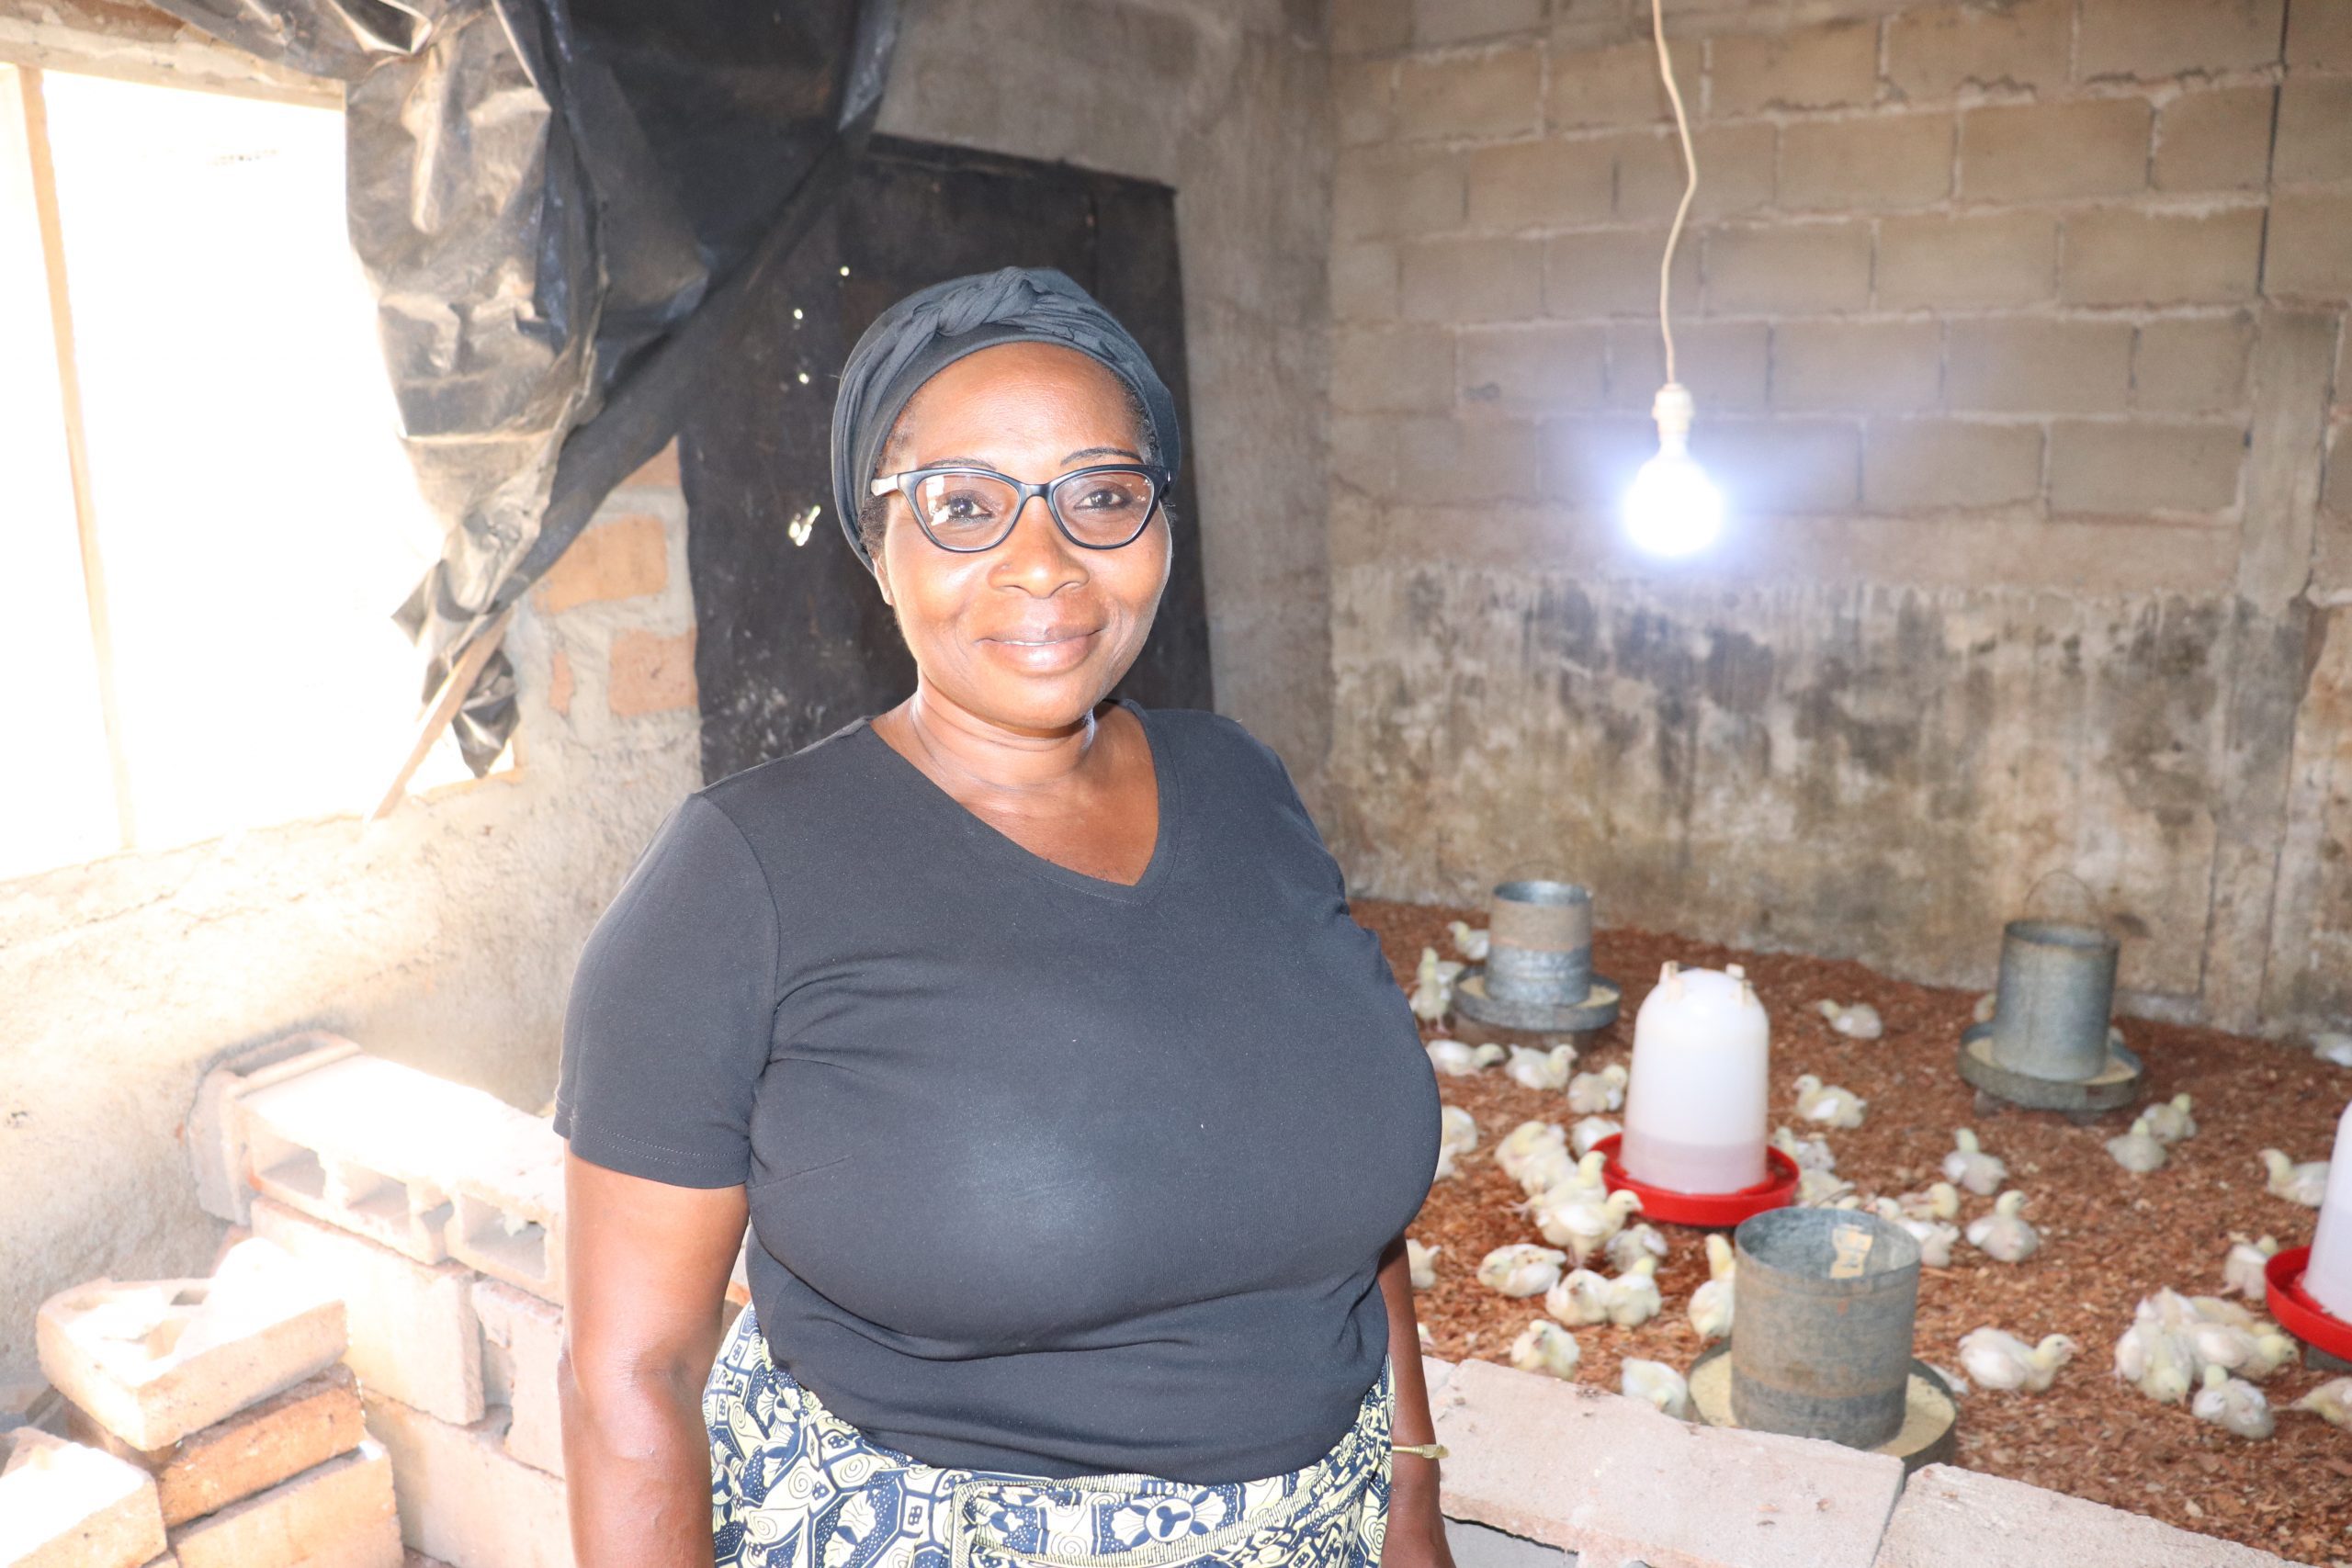 Helena Manura stands in her chicken coop in Cabo Delgado, Mozambique